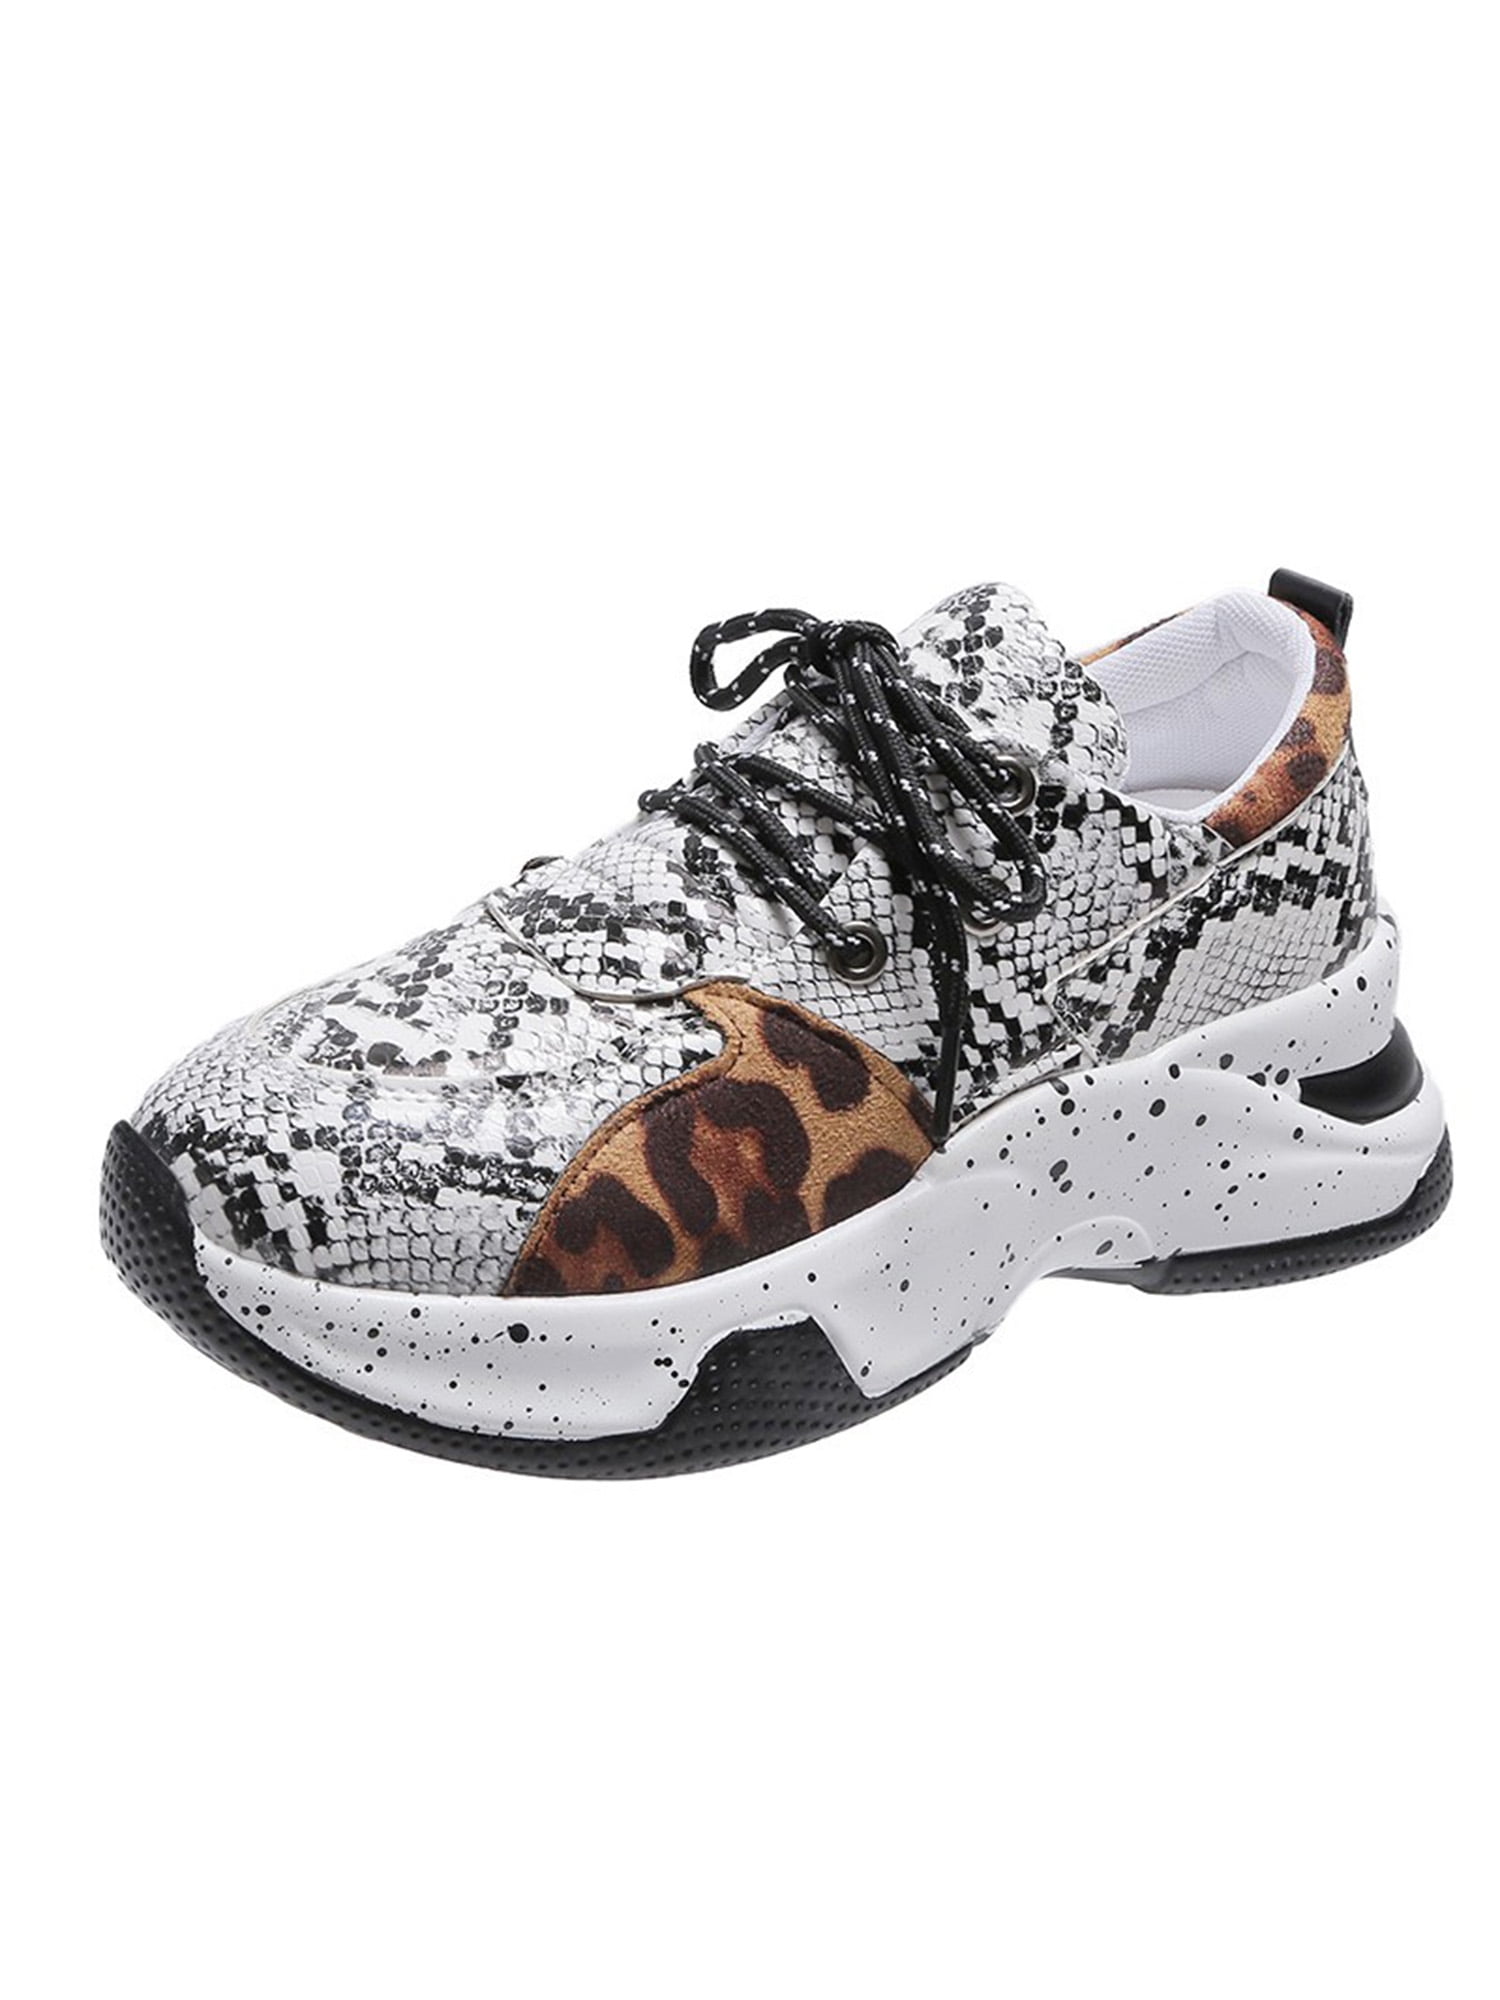 Shoes Sneakers Lace-Up Sneakers Puma Lace-Up Sneaker black animal pattern casual look 